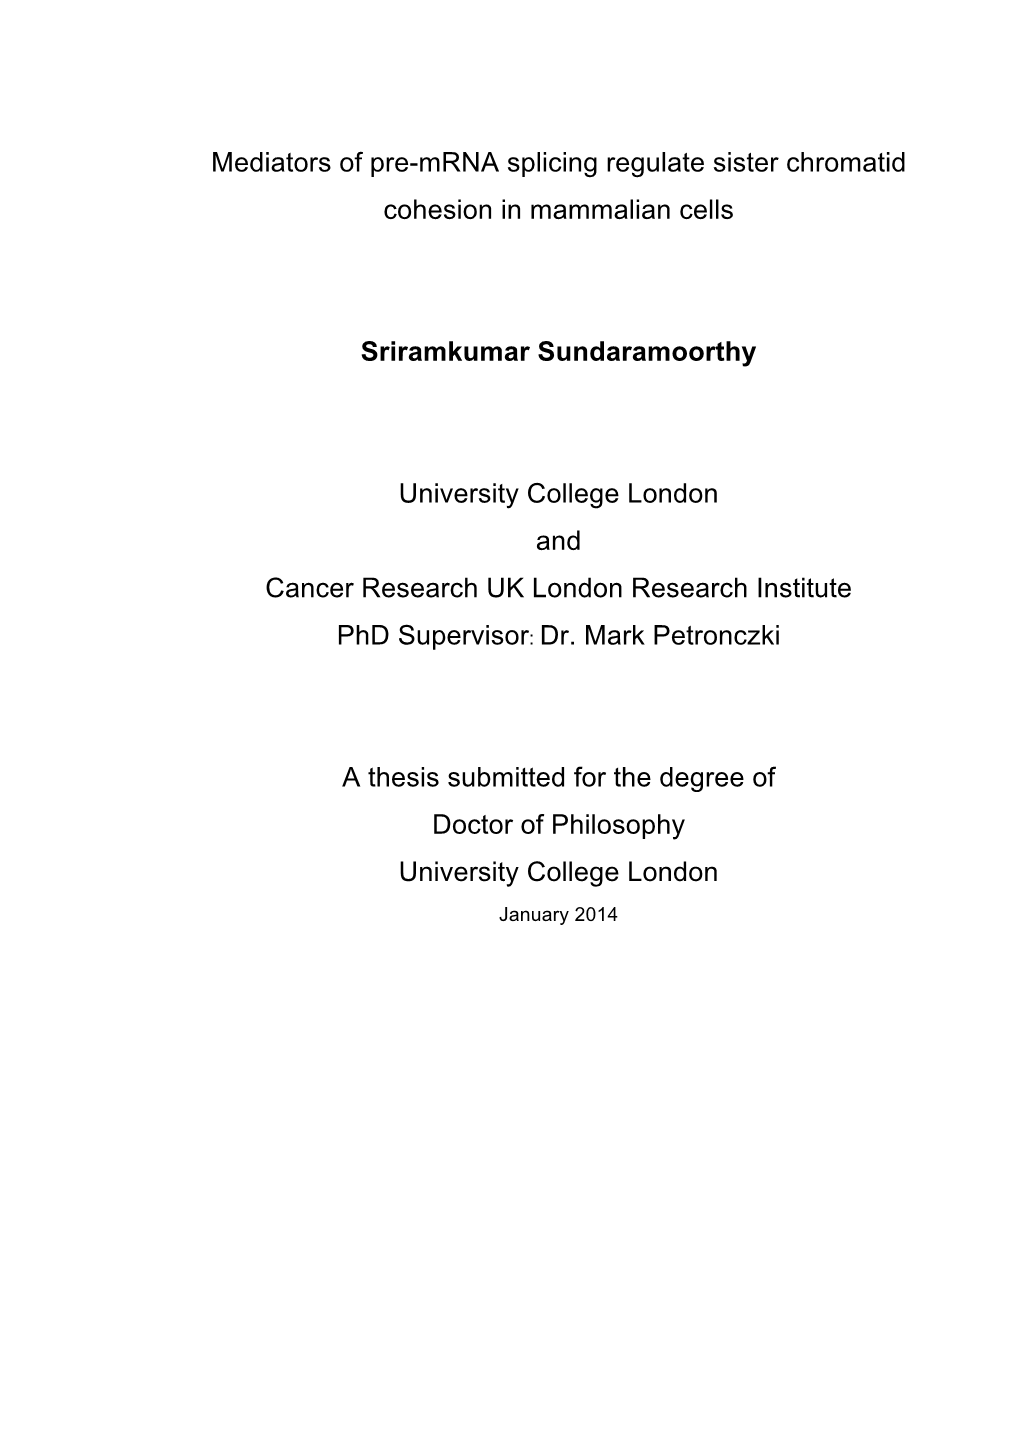 Ram Phd Thesis After Corrections 13012014 with Lola Footnote